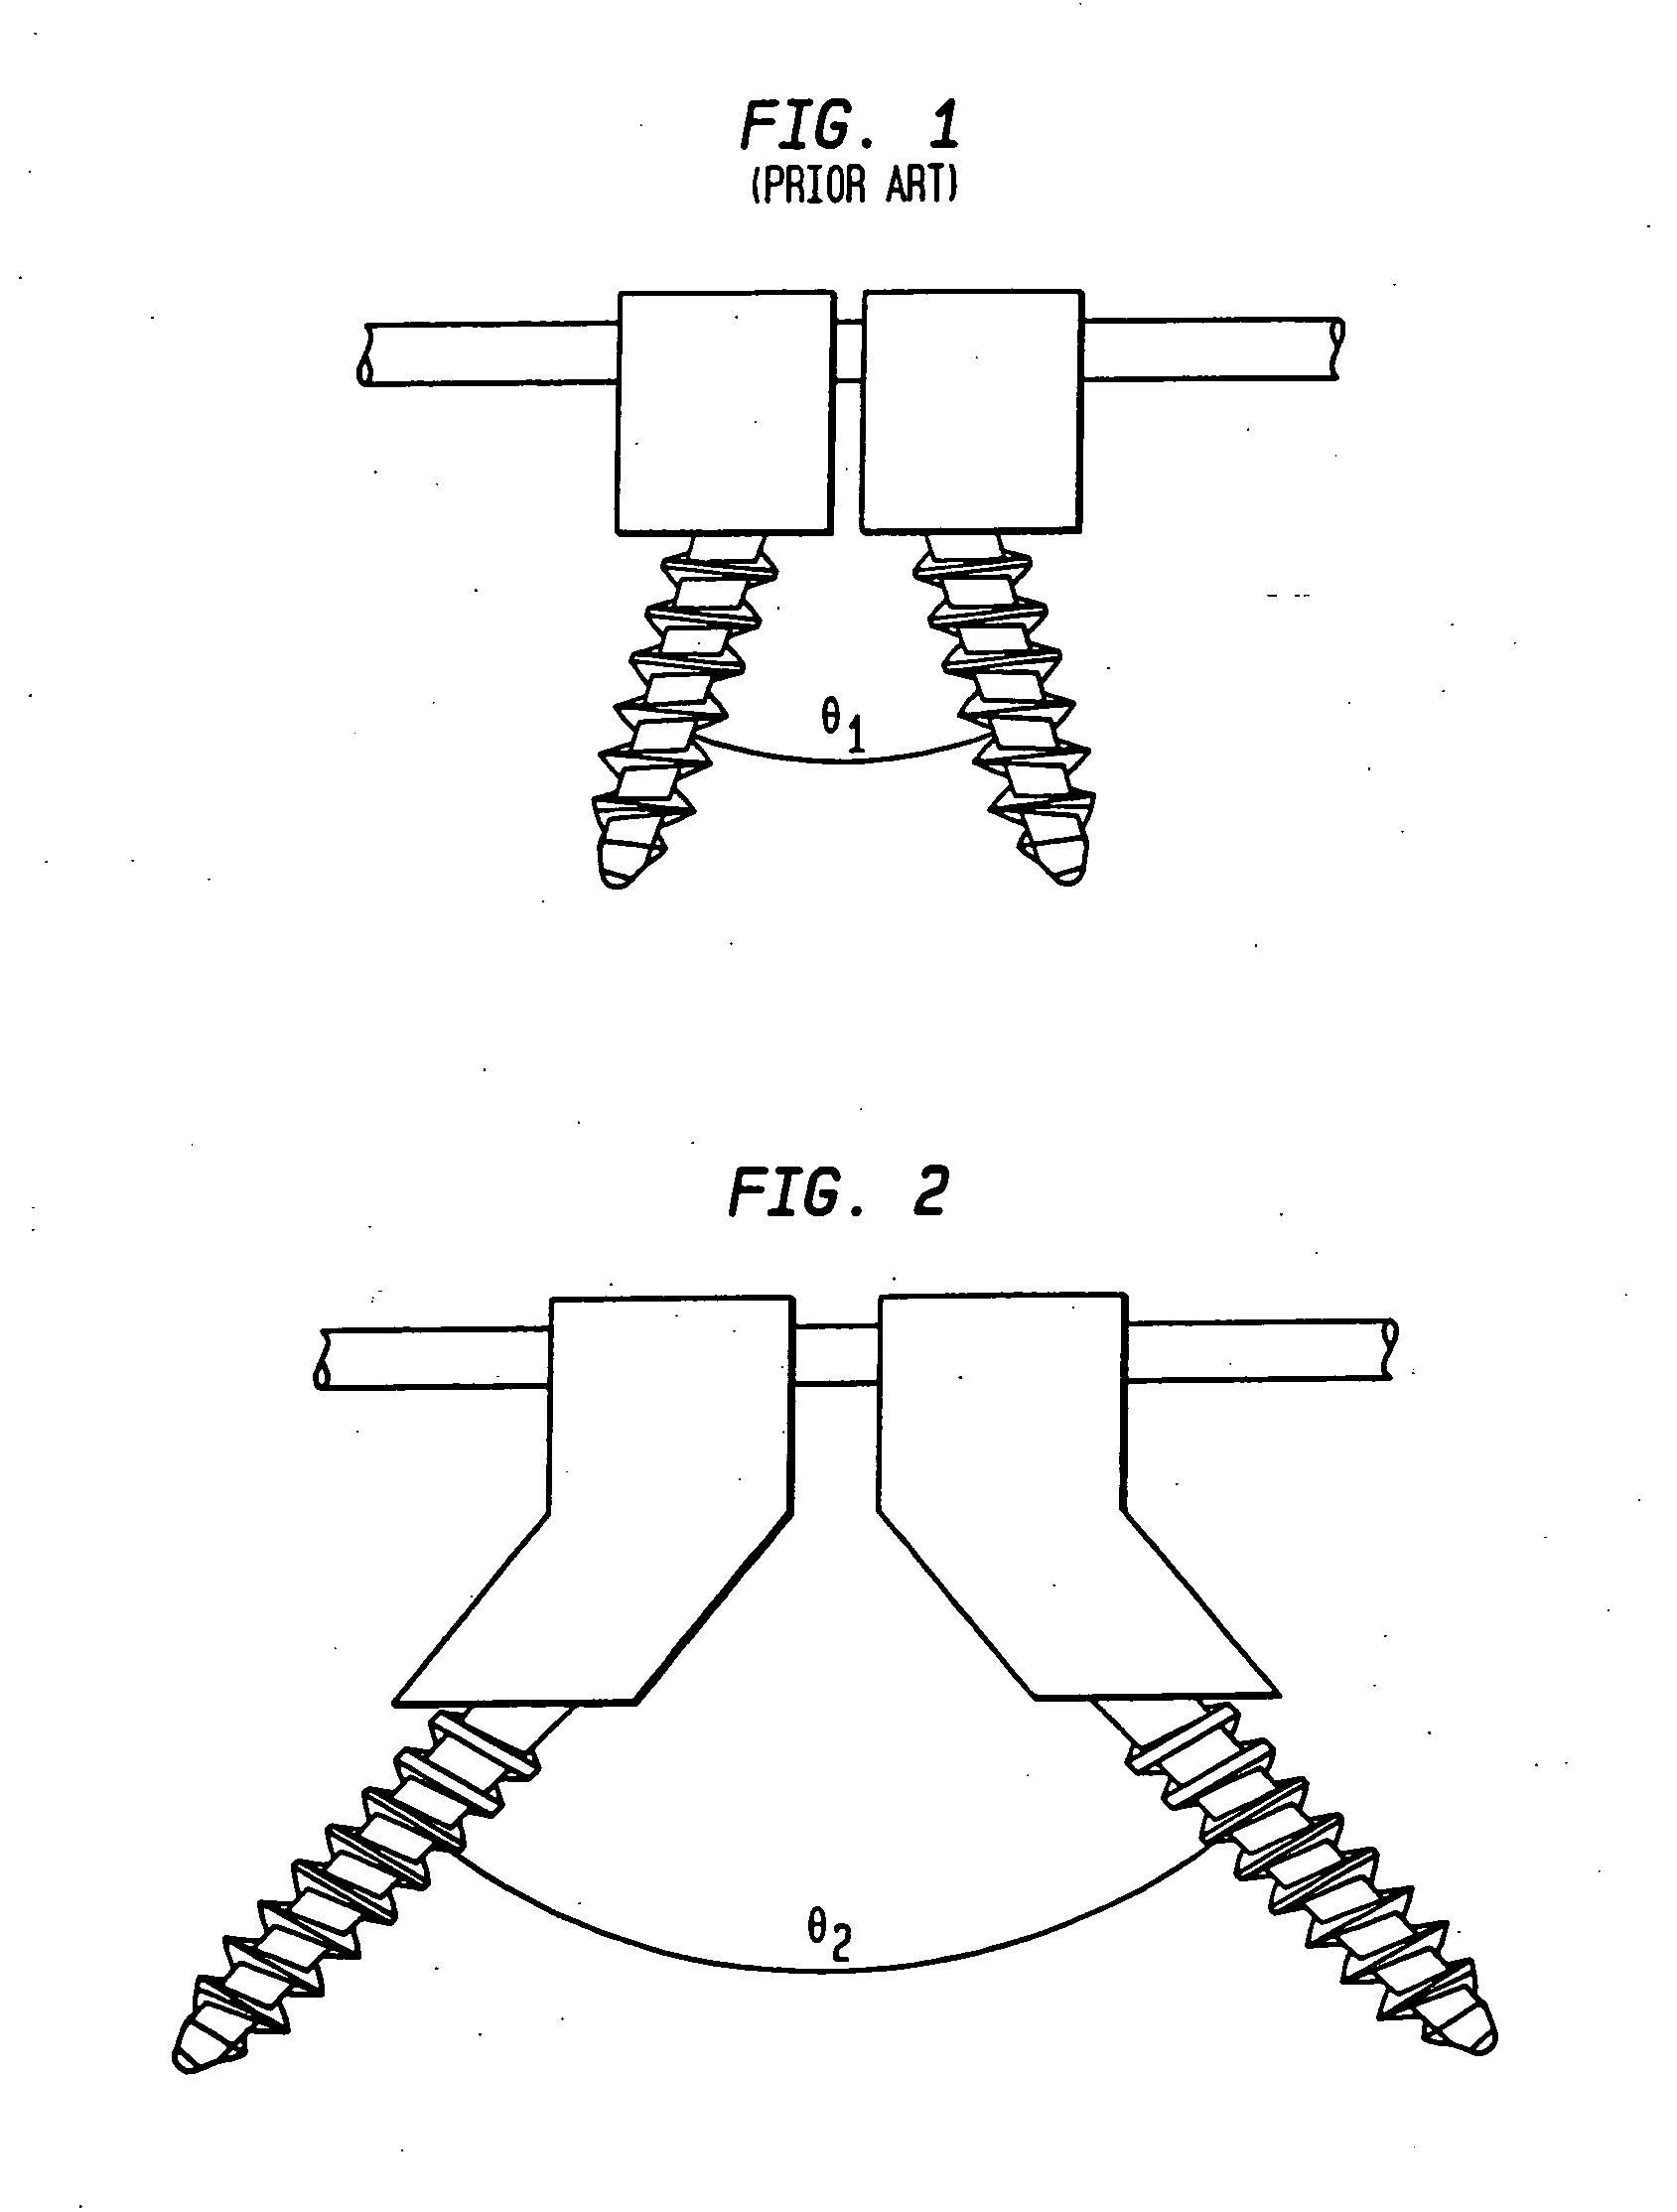 Methods for stabilizing bone using spinal fixation devices